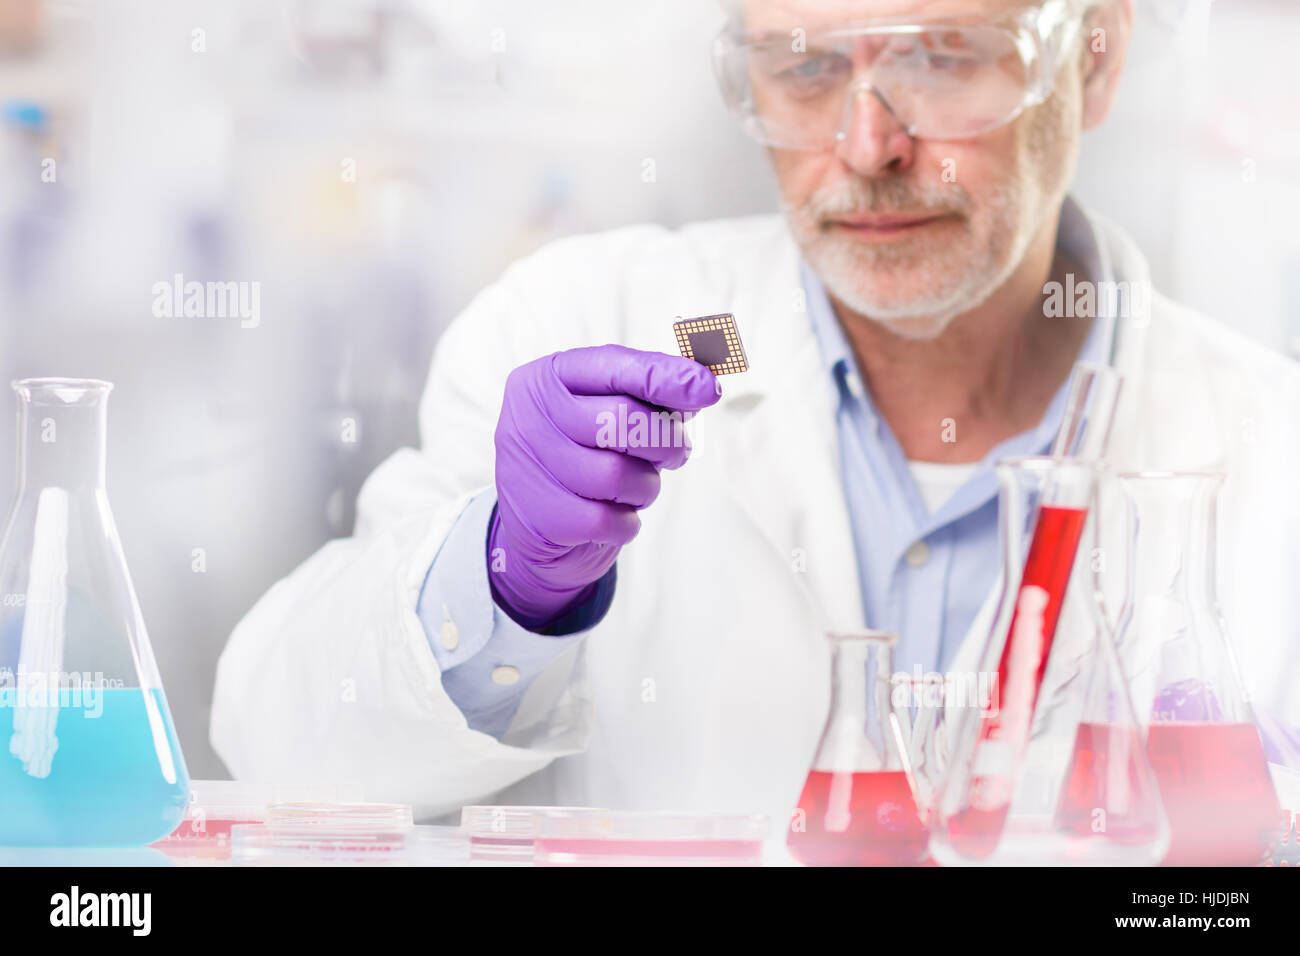 Life Science-Forschung. Stockfoto